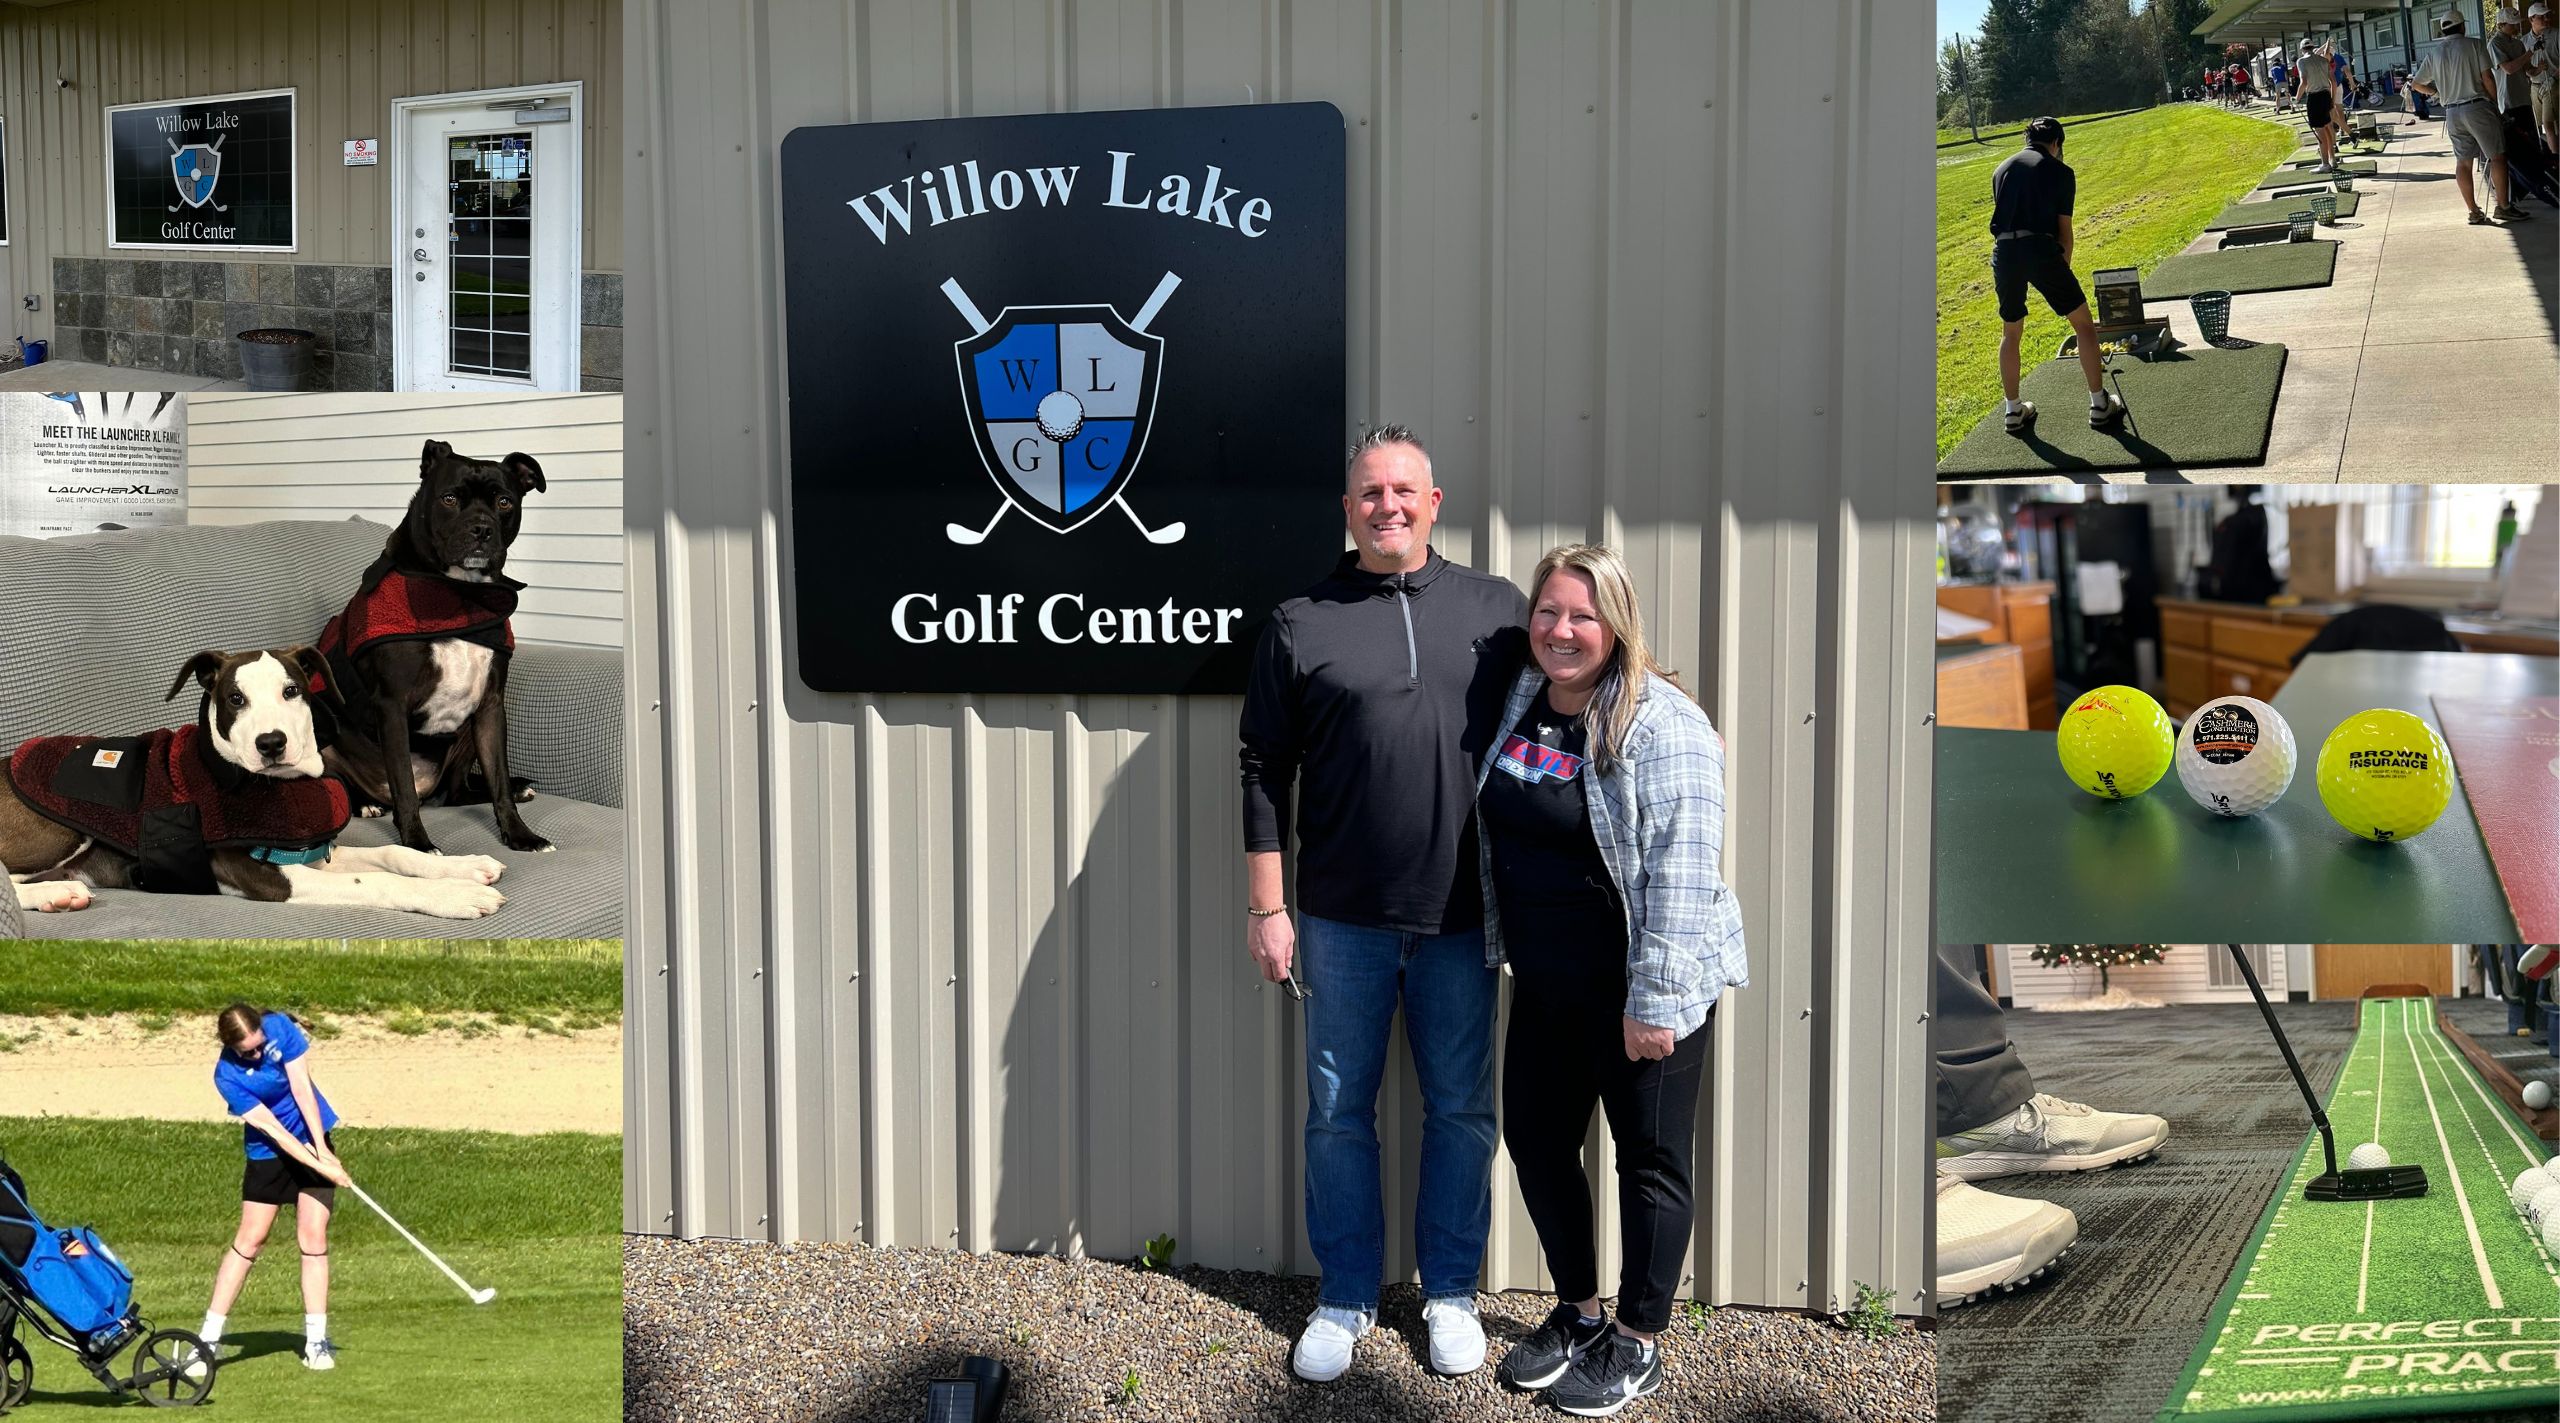 Willow Lake Golf Center - Drive, Putt, Chip, and Drive